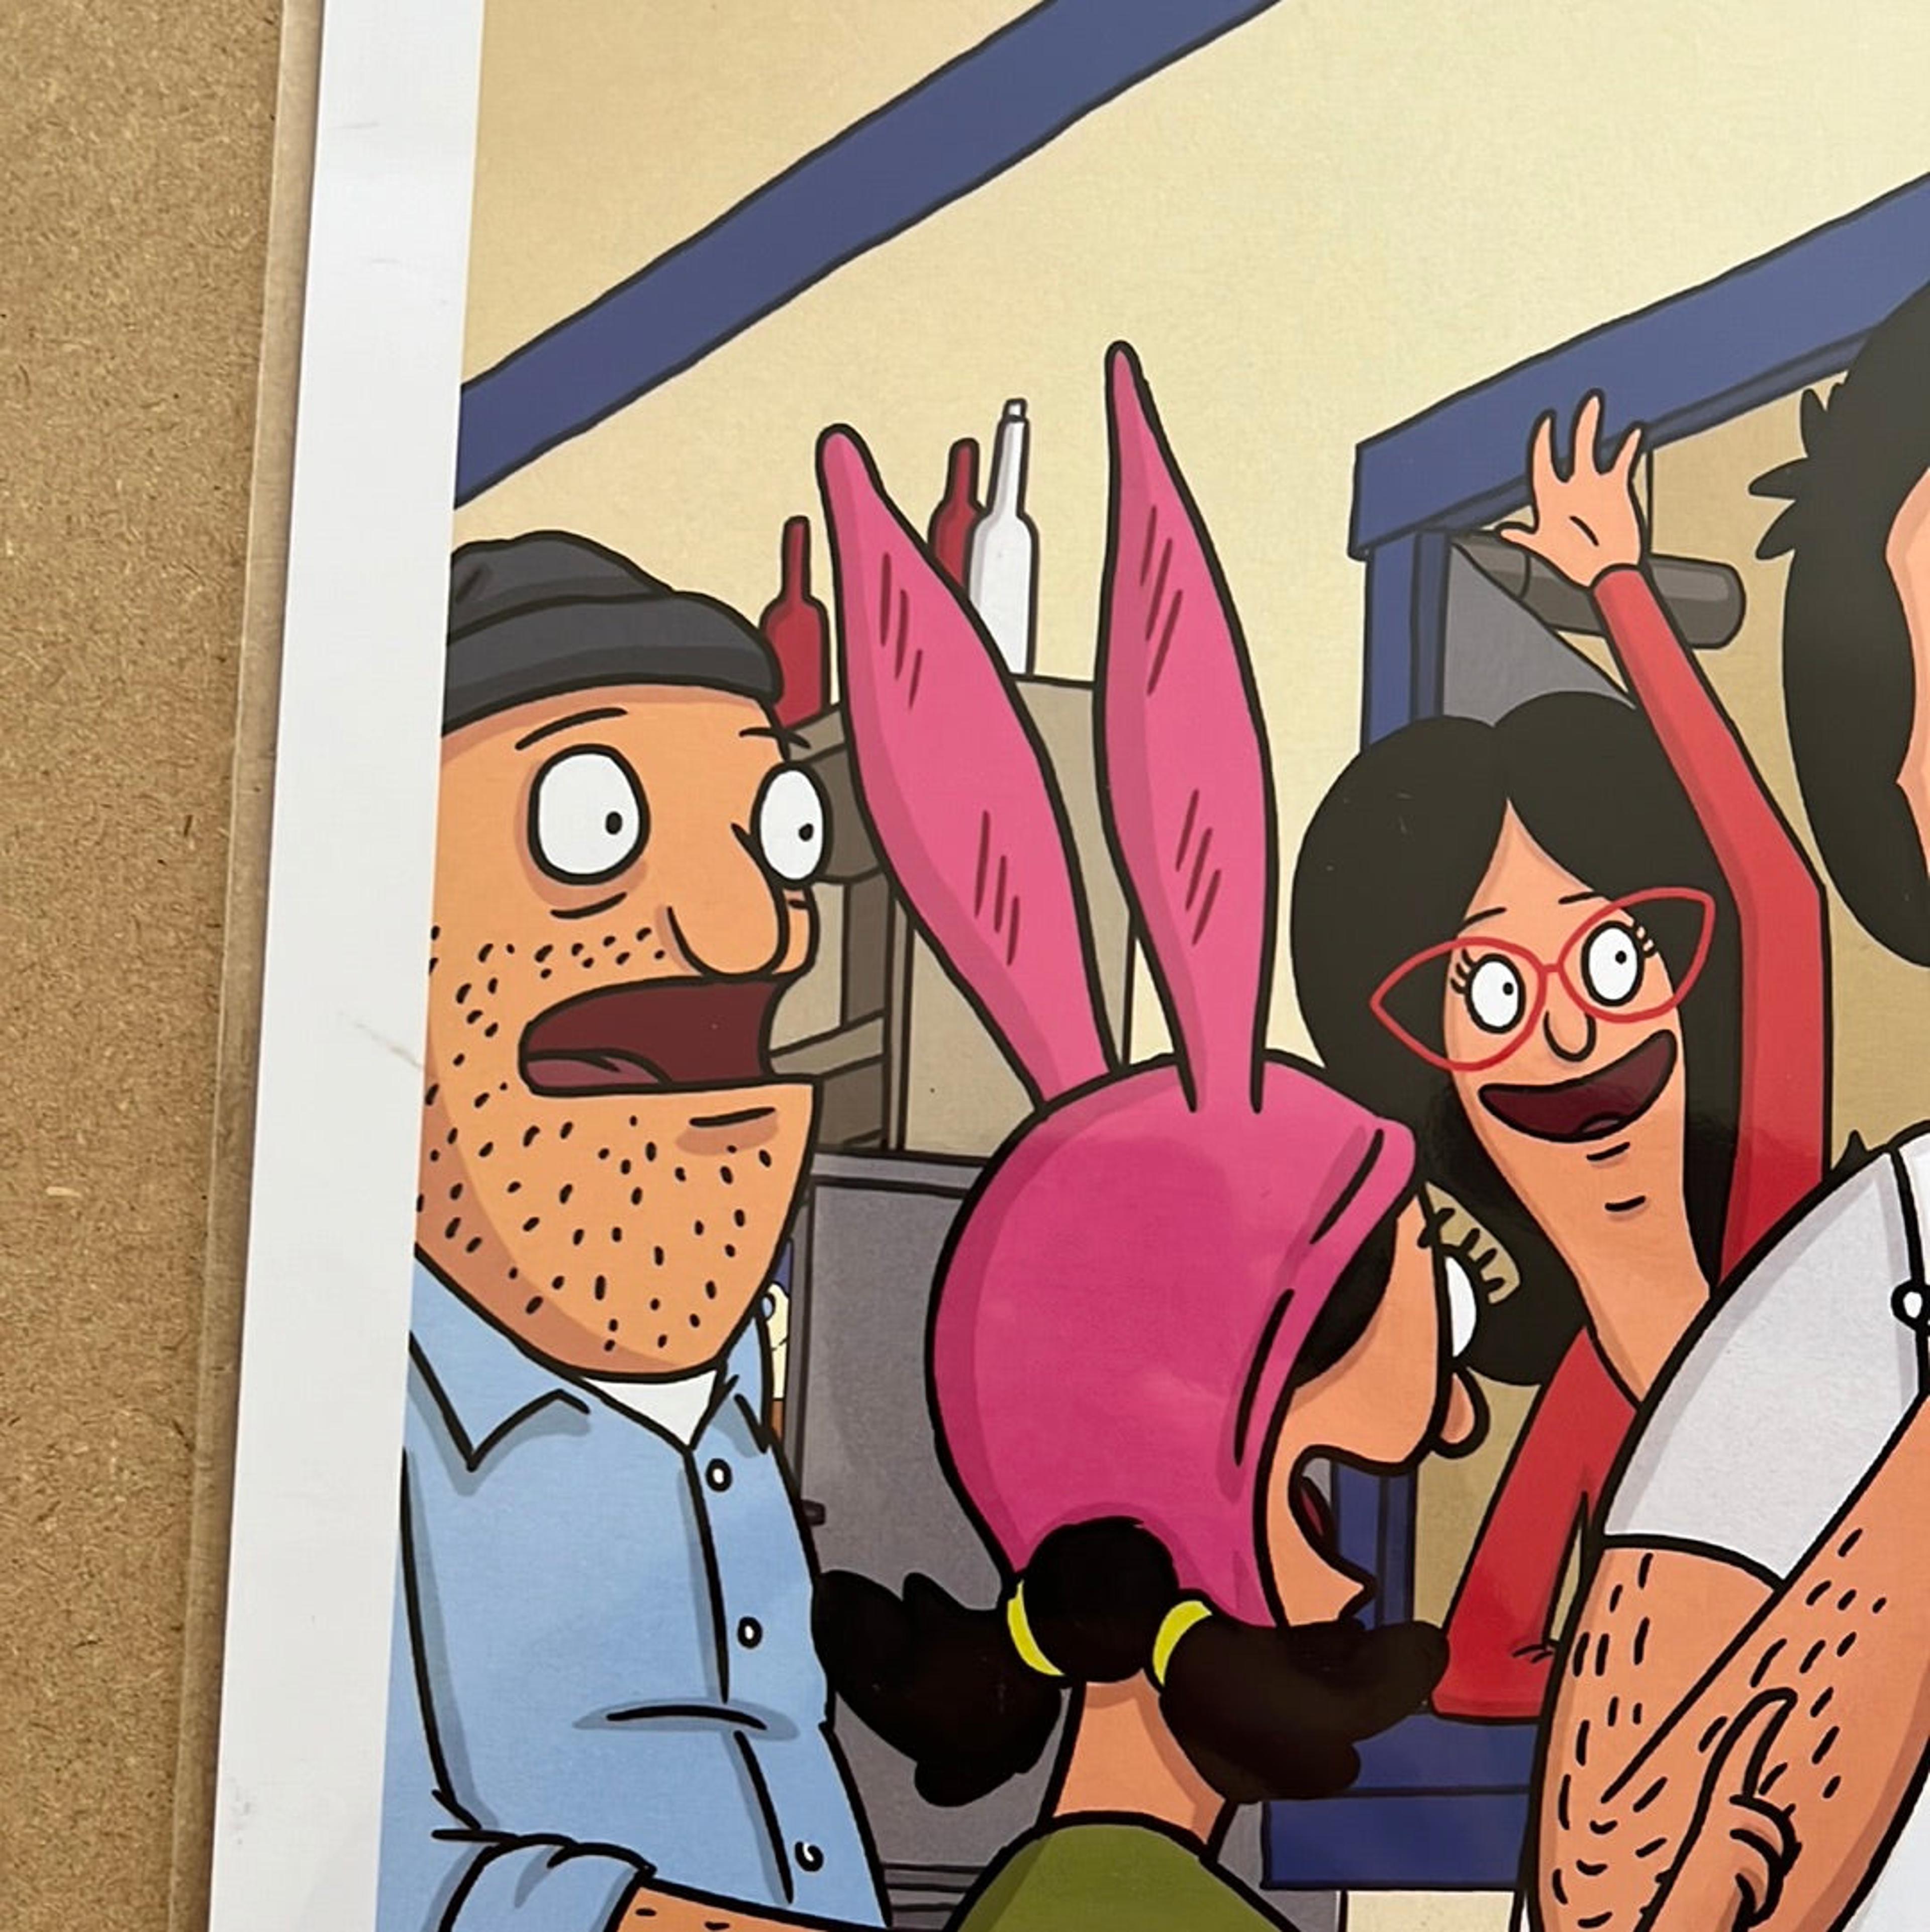 Alternate View 2 of Bob's Burgers "Bobs Menu” by Frank Forte 13x19 signed Print